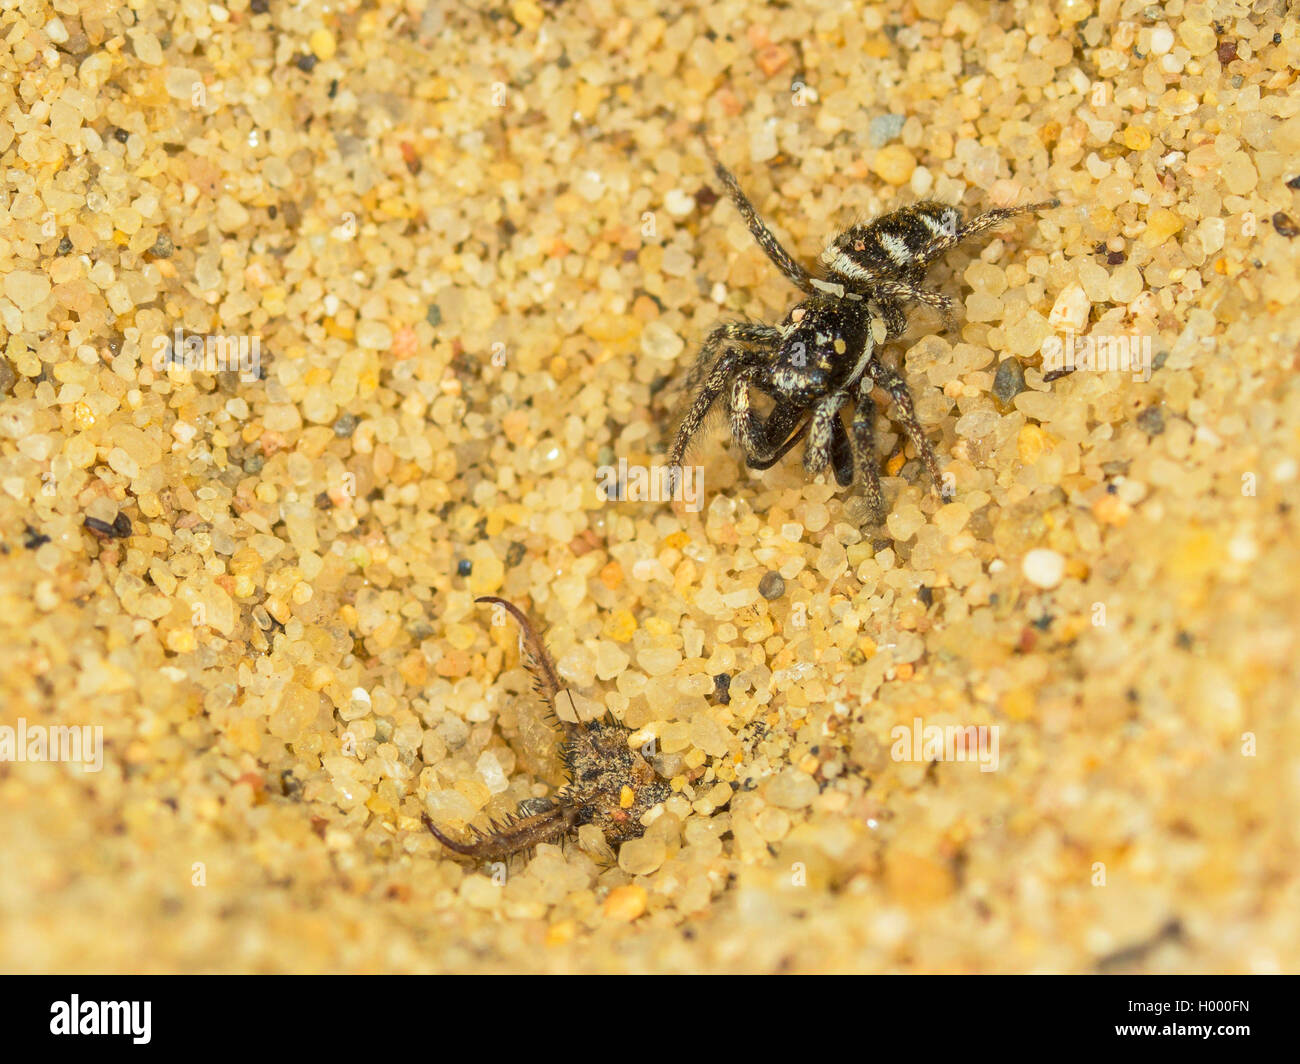 European antlion (Euroleon nostras), Captured Zebra Spider (Salticus scenicus) trying to flee out of the conical pit, Germany Stock Photo